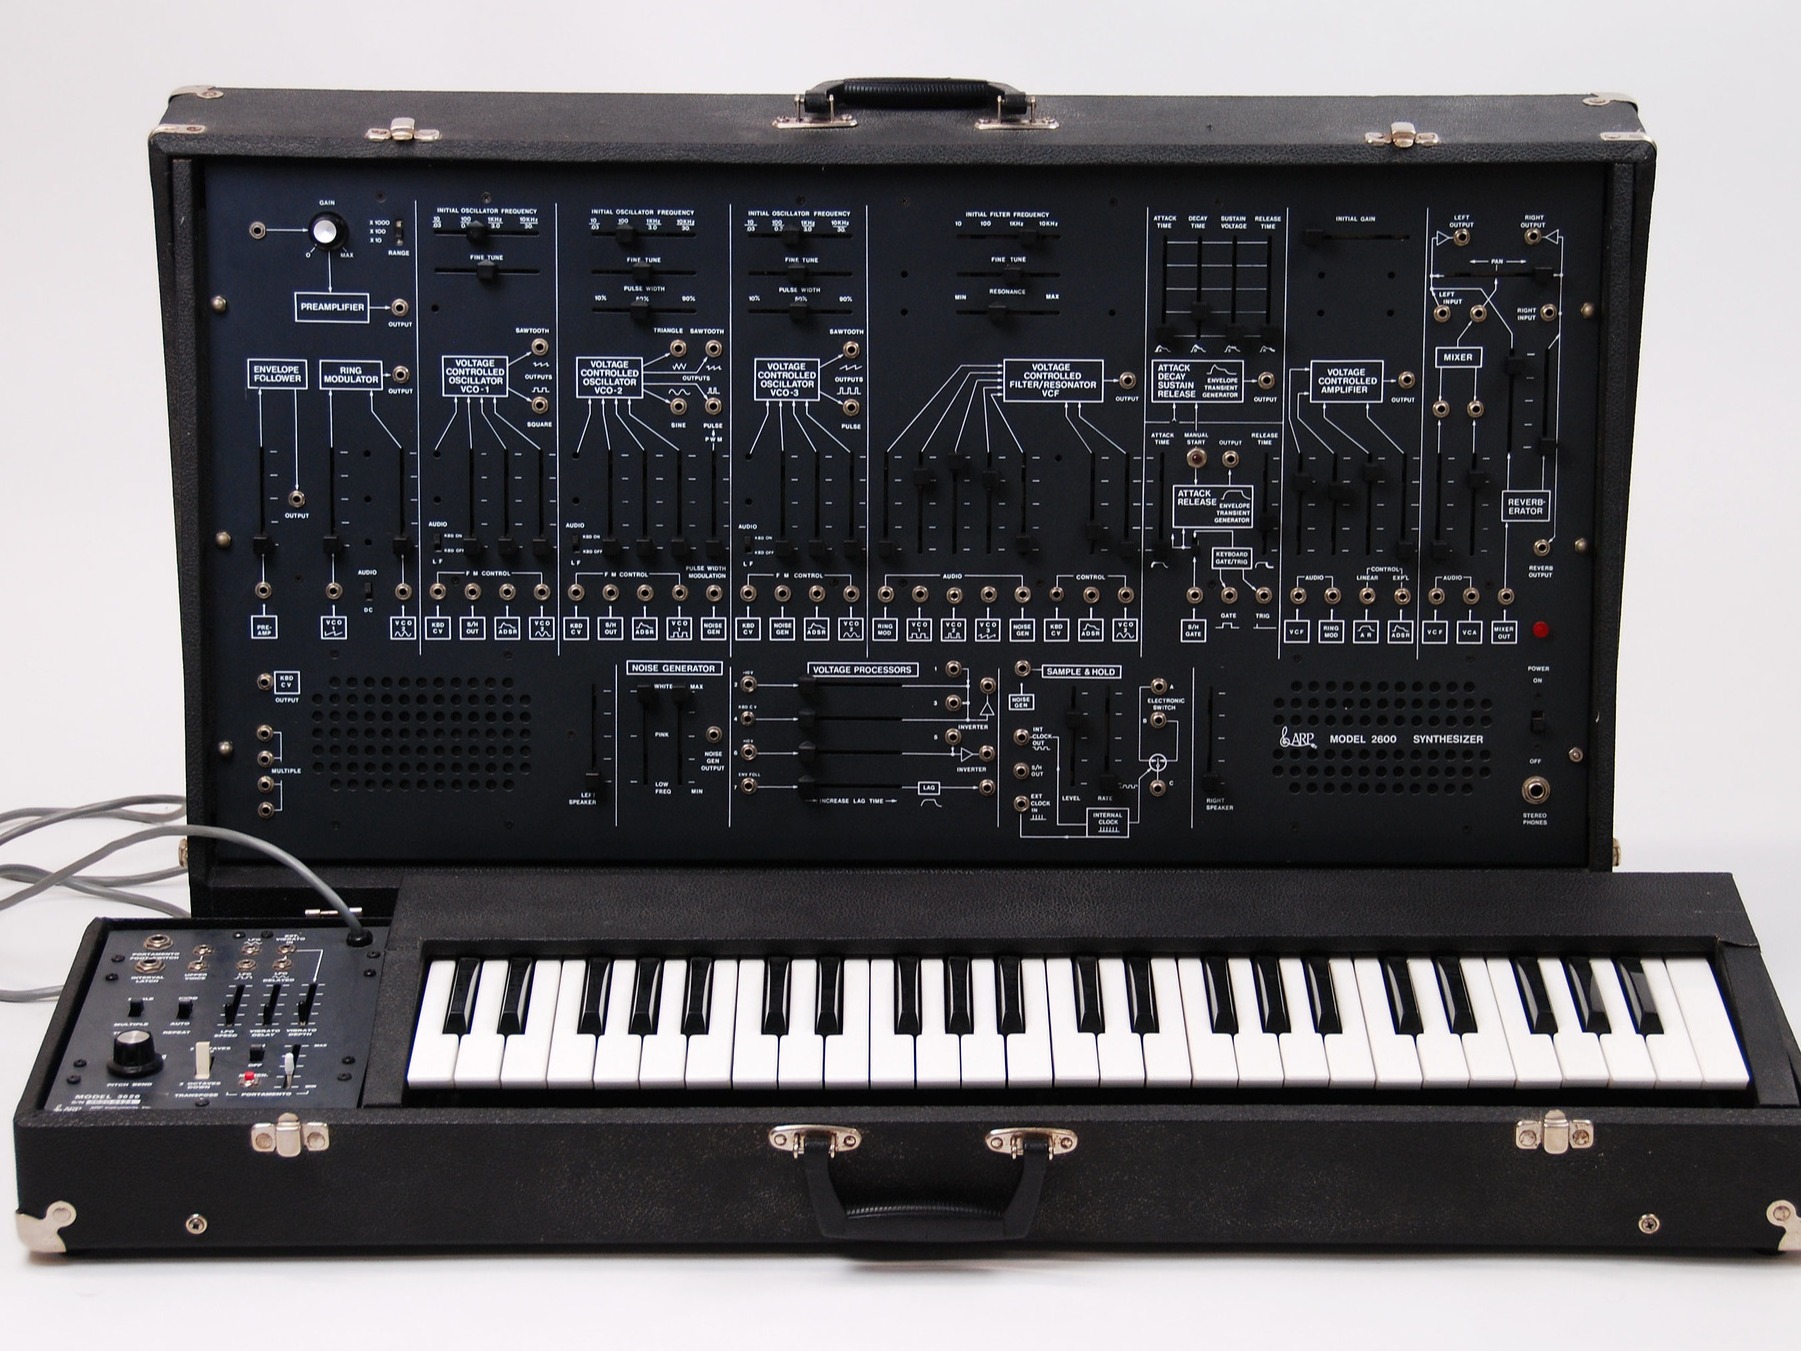 ARP 2600 at Synth Restore